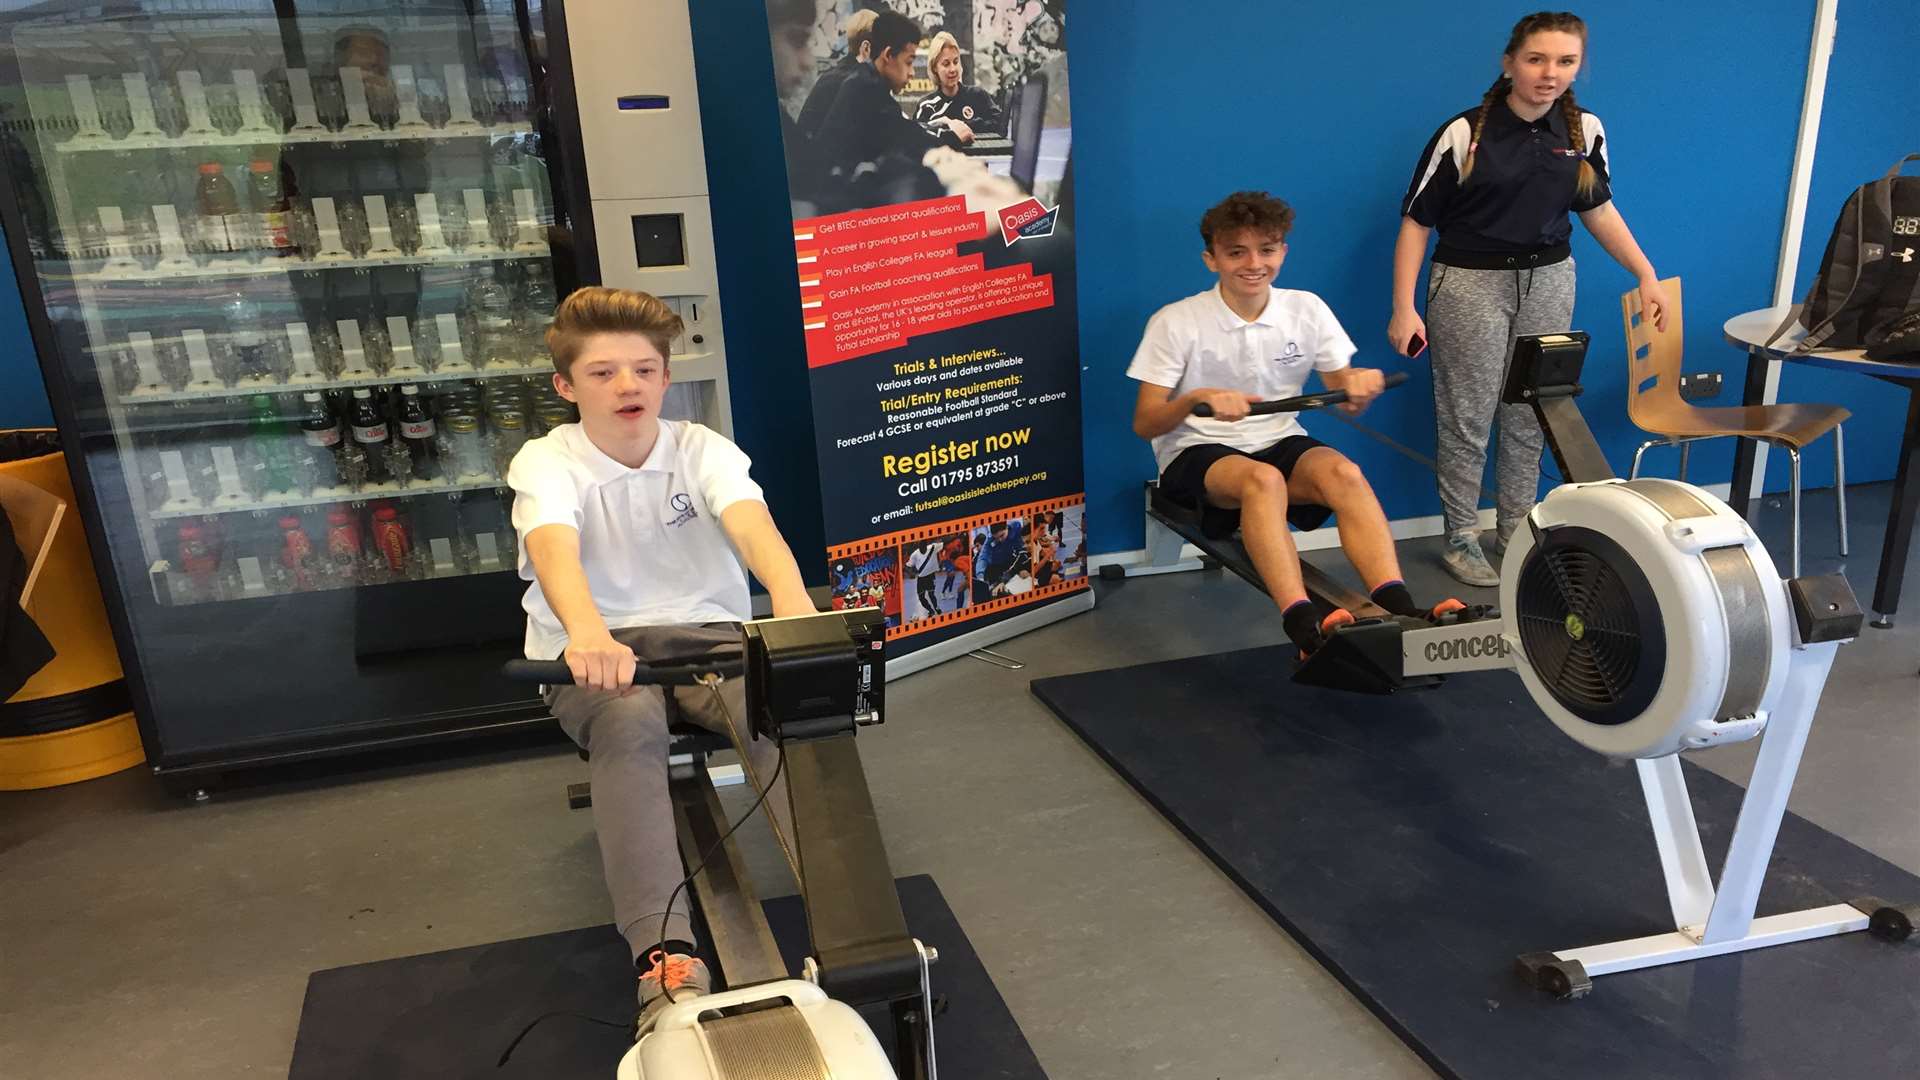 Matthew Chatten and Darren Cooper take part in a rowing challenge with Sydney Smith